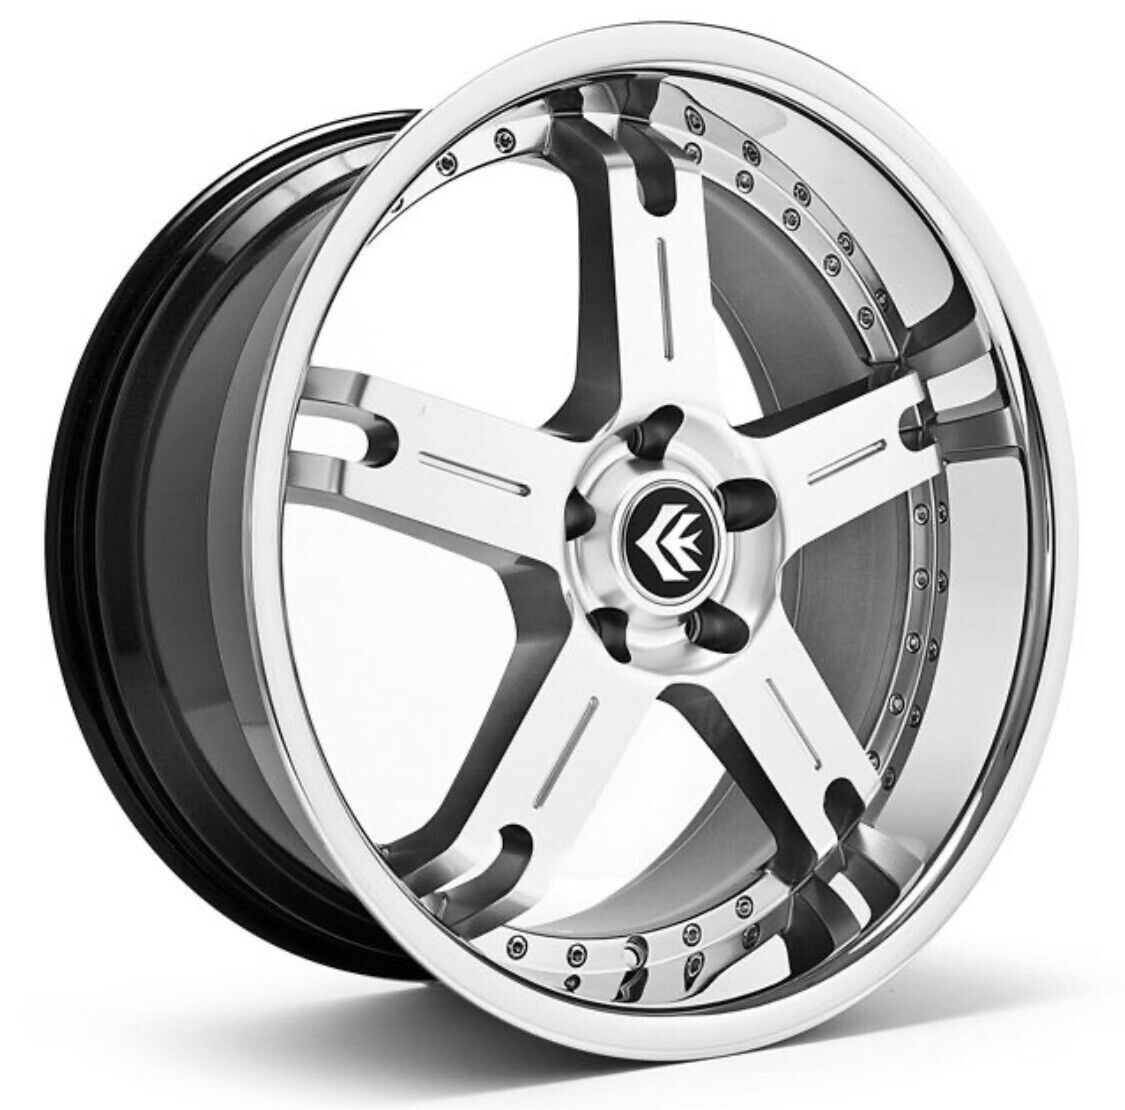 20” X8.5 20”x9.5 5 Lug 120 New Wheels Closeout Special 599.00 For The Set Of 4